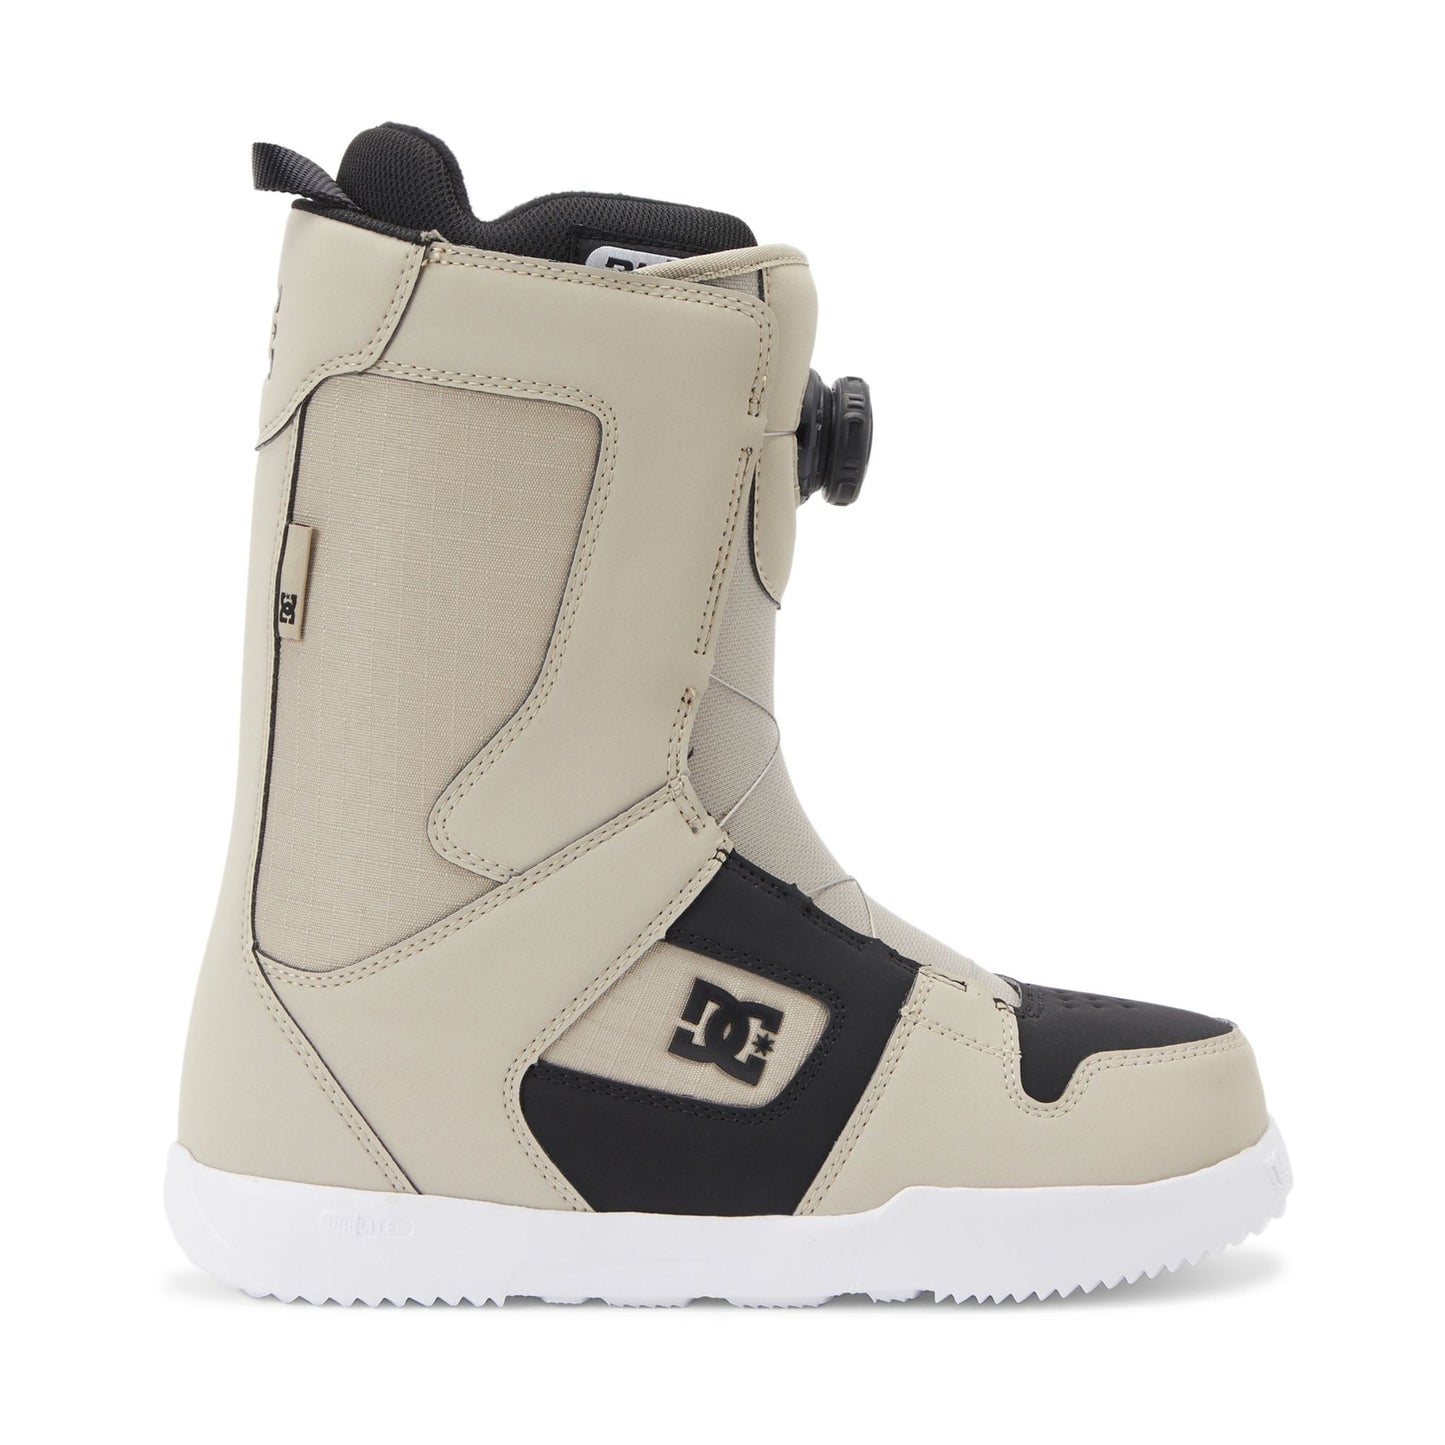 DC Phase BOA Snowboard Boots Camel Black Snowboard Boots